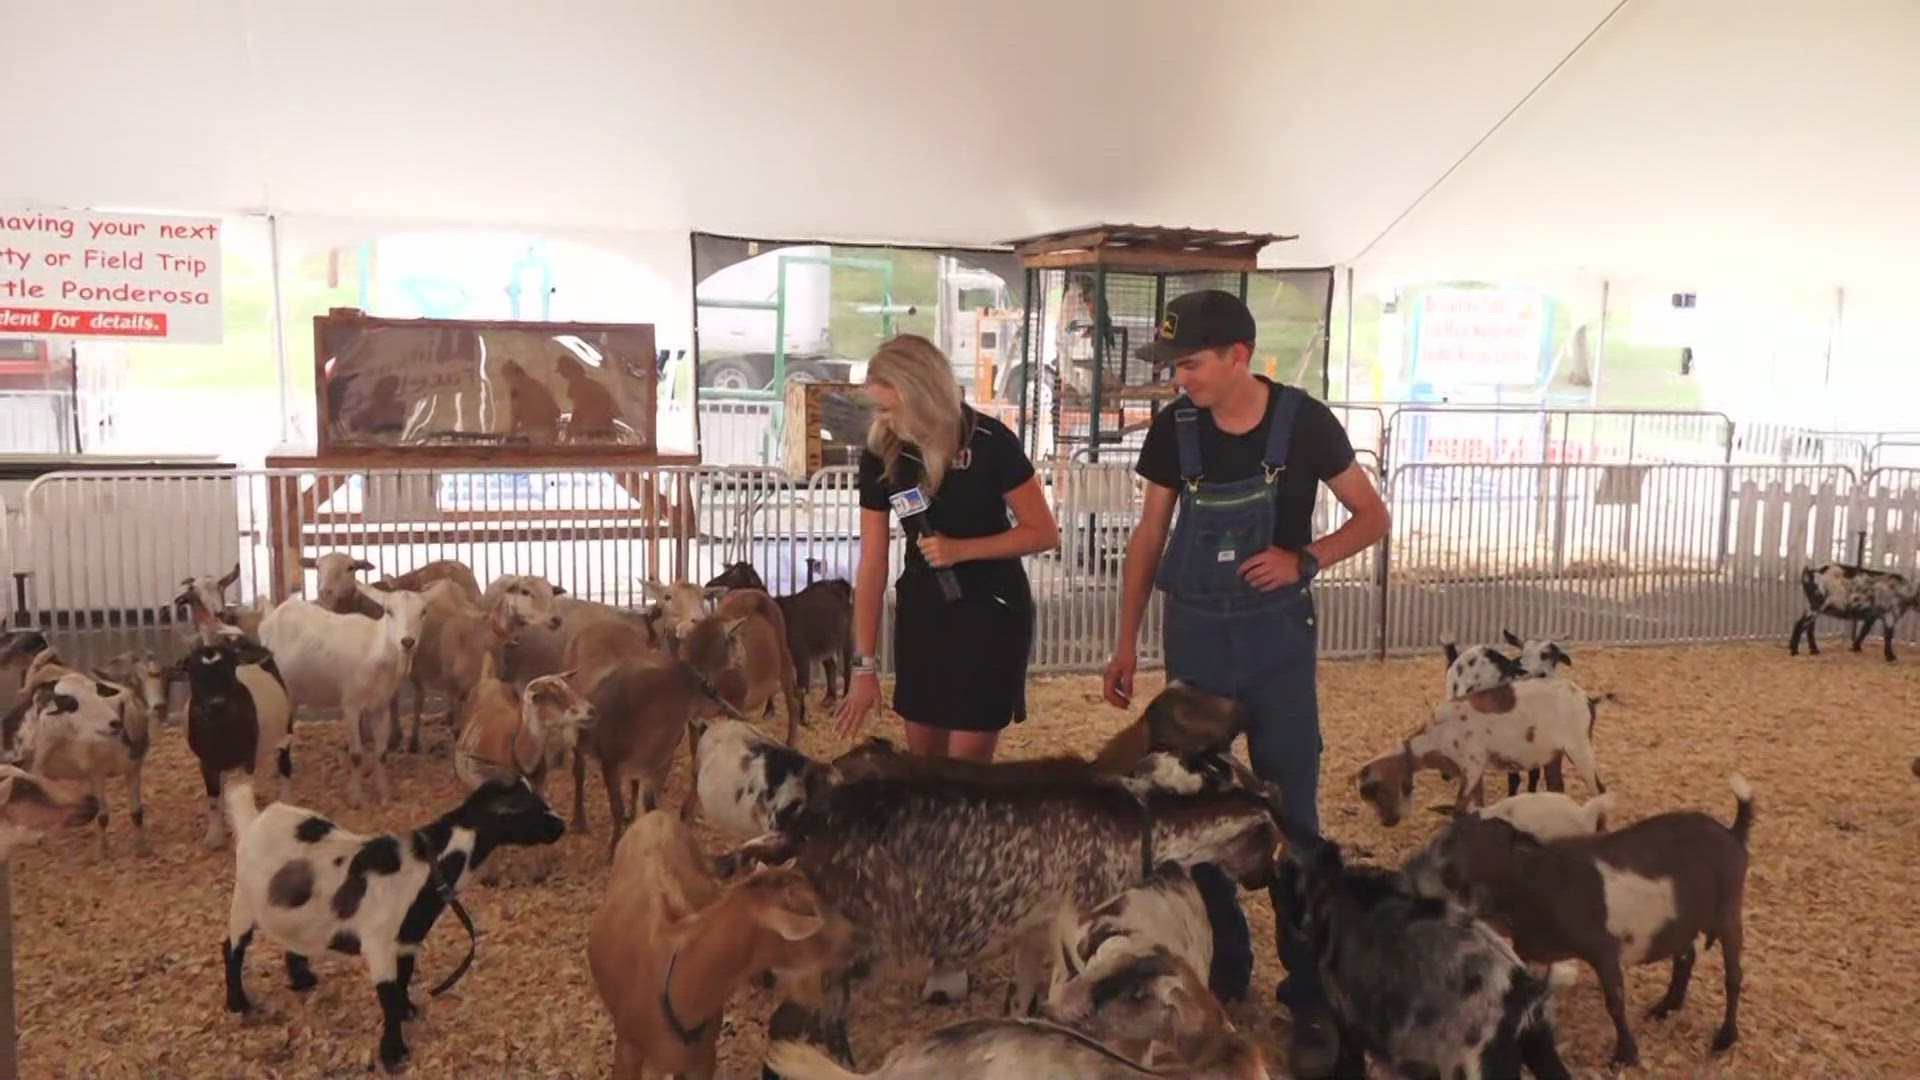 WBIR's Katie Inman made some new friends at the Tennessee Valley Fair.